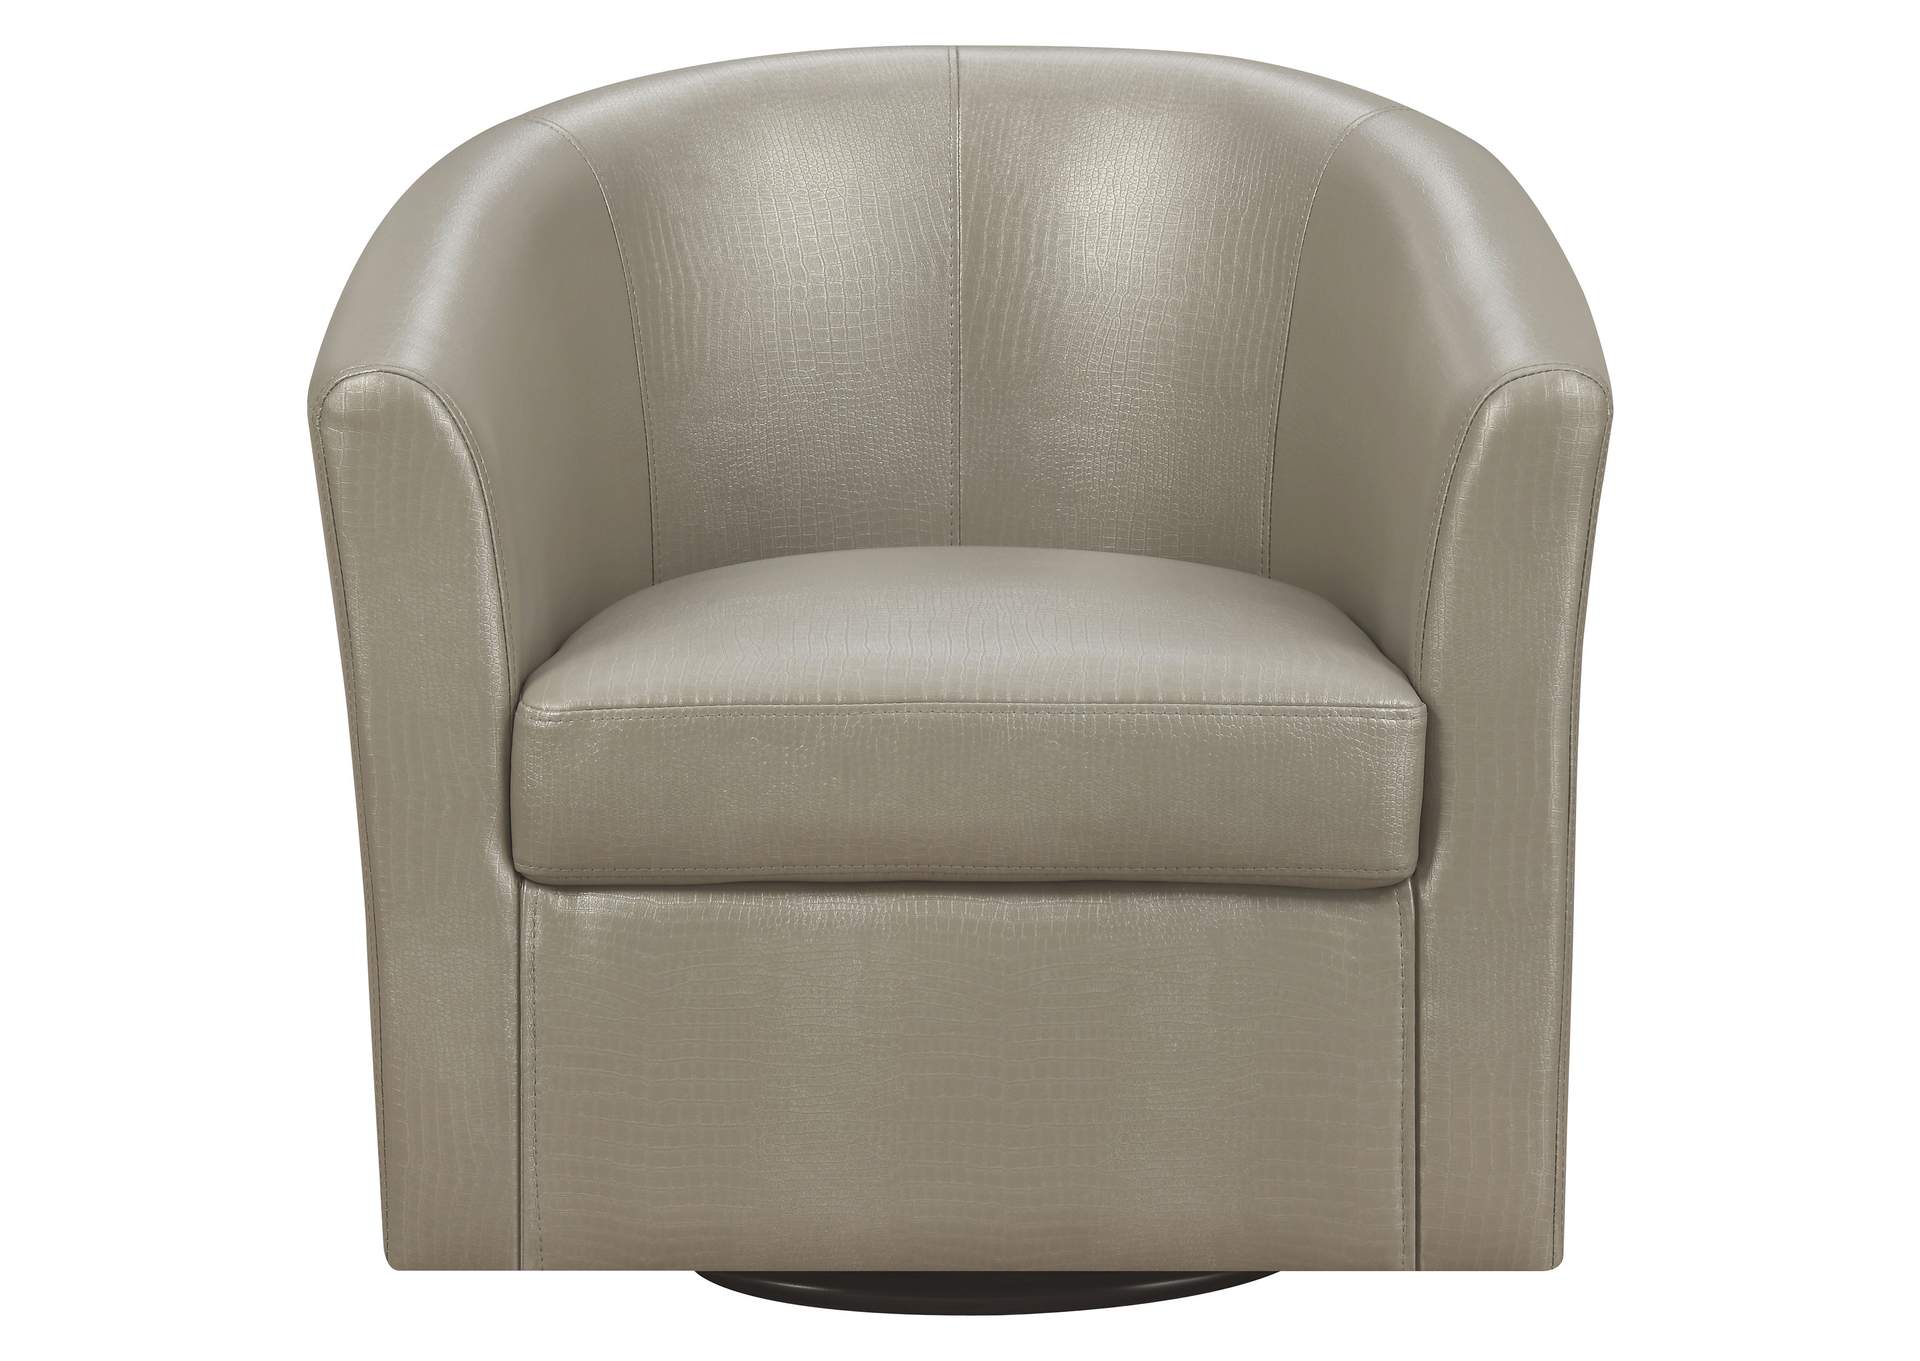 Turner Upholstery Sloped Arm Accent Swivel Chair Champagne,Coaster Furniture